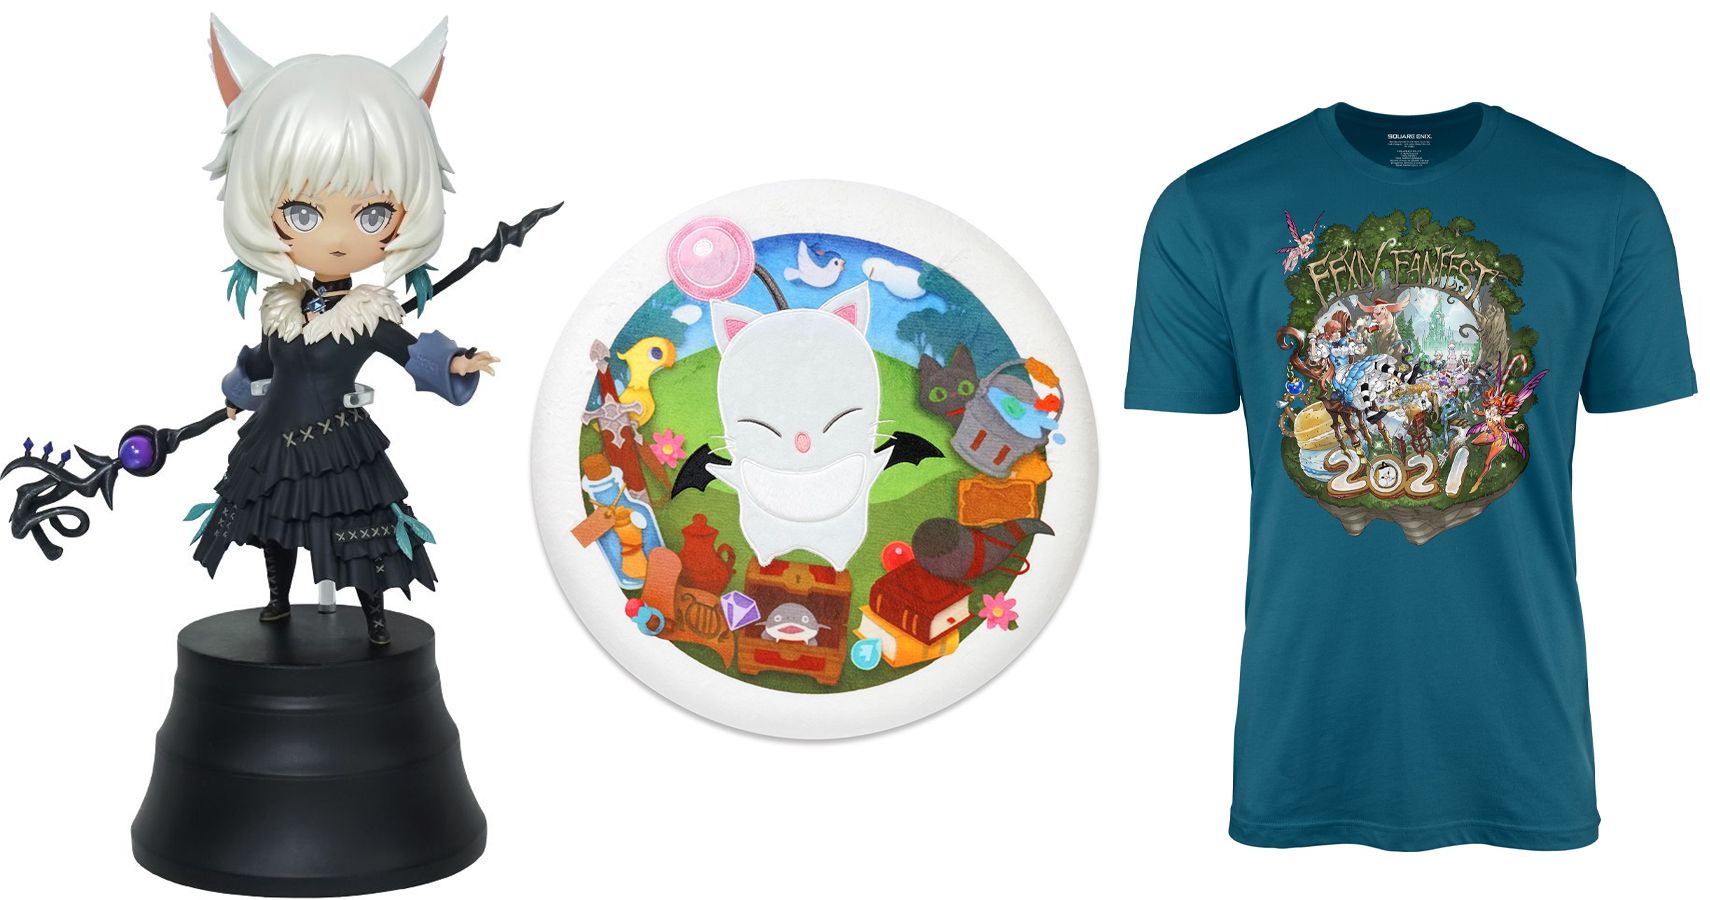 You Can Now Preorder Limited Final Fantasy 14 Fan Festival Merch